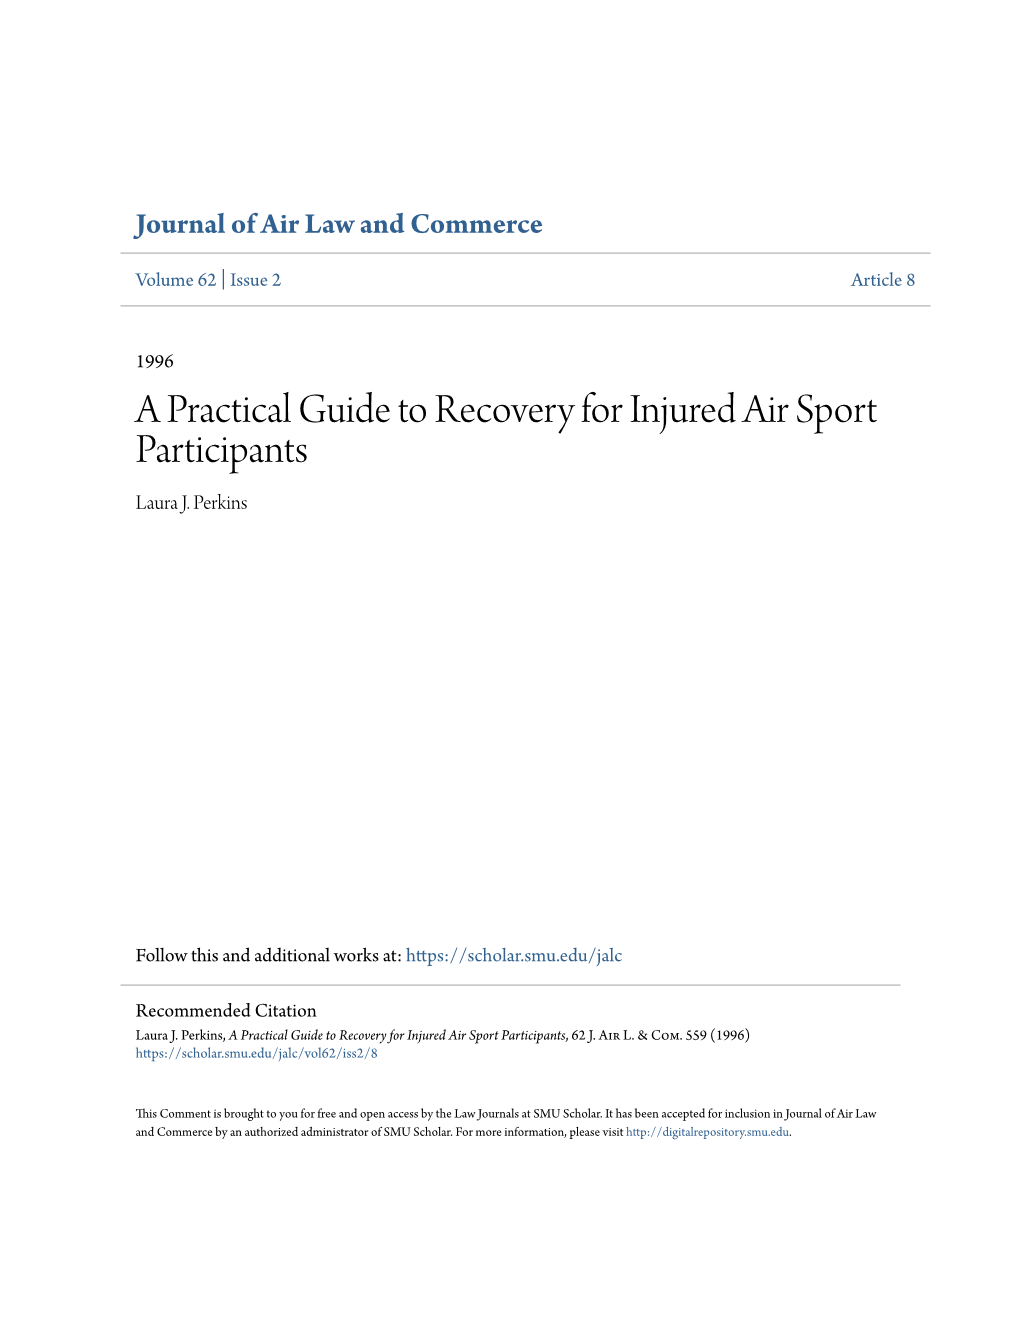 A Practical Guide to Recovery for Injured Air Sport Participants Laura J